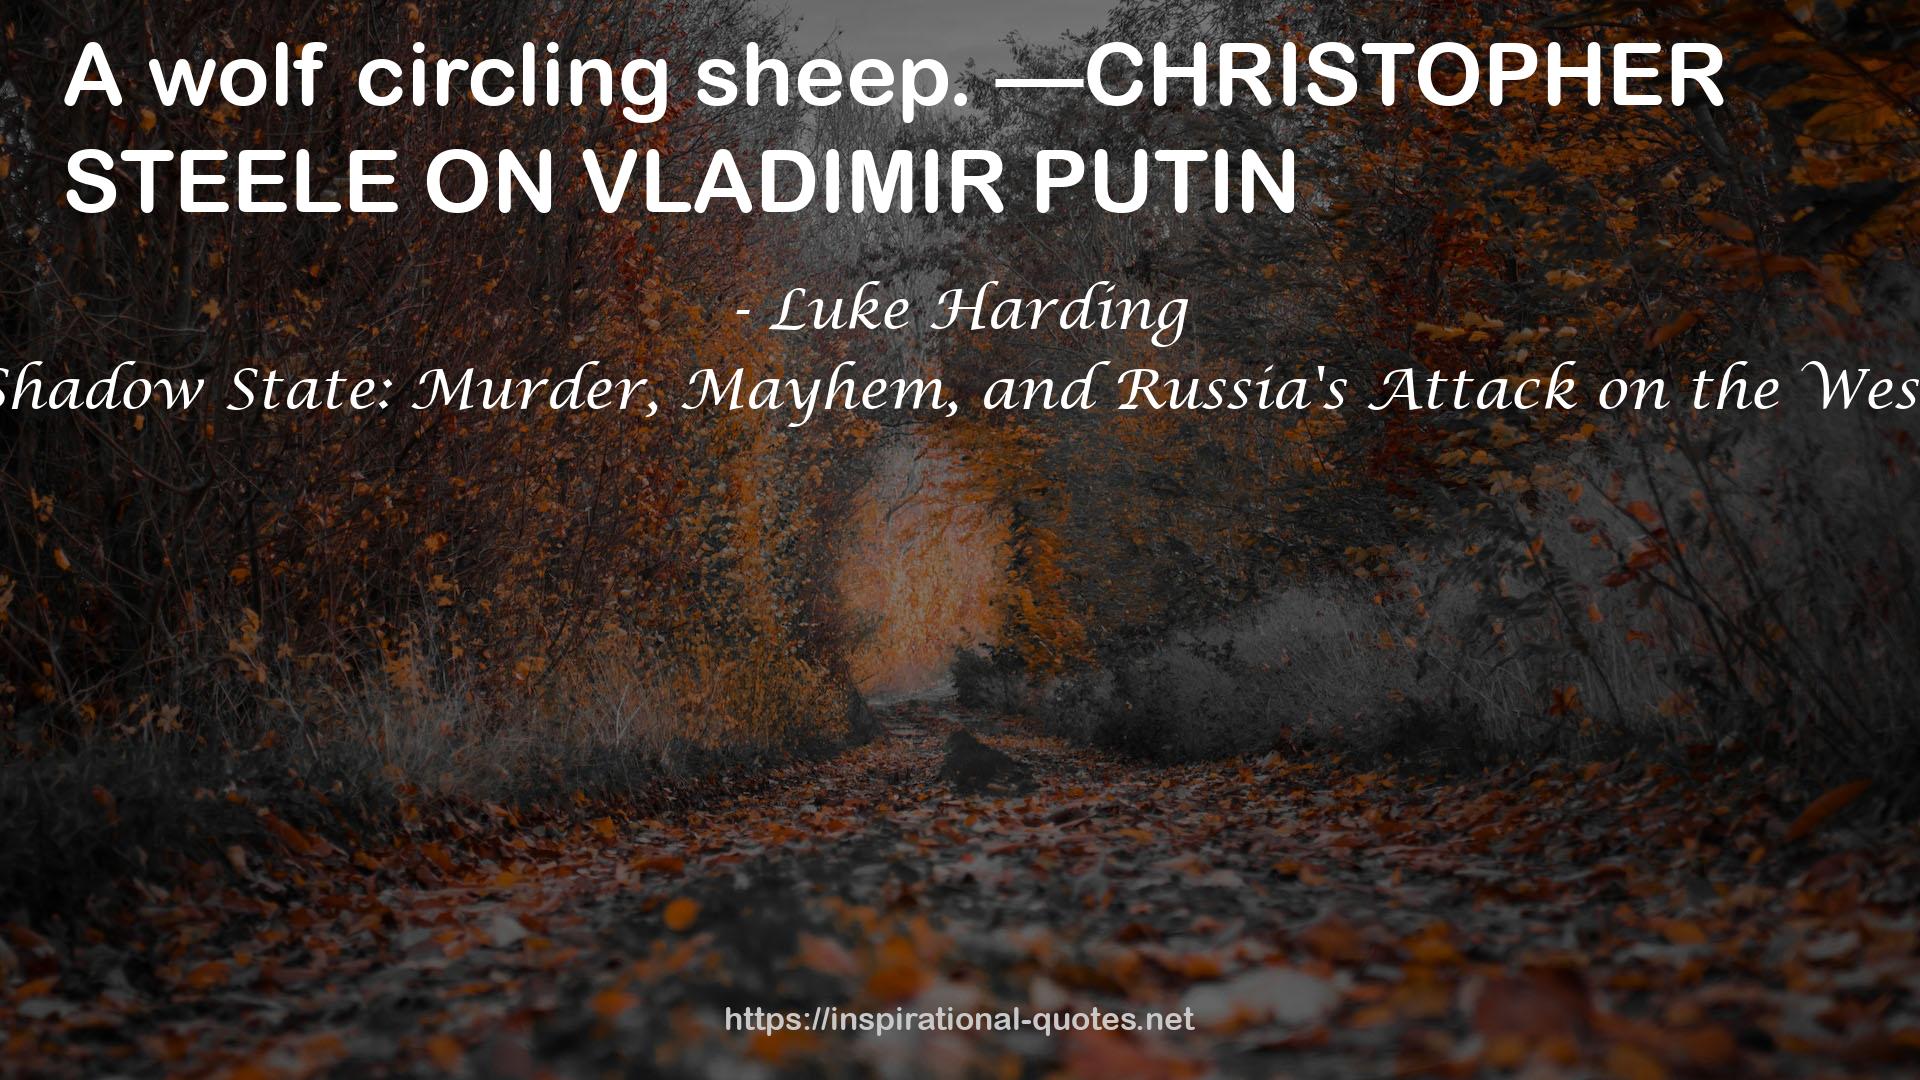 Shadow State: Murder, Mayhem, and Russia's Attack on the West QUOTES